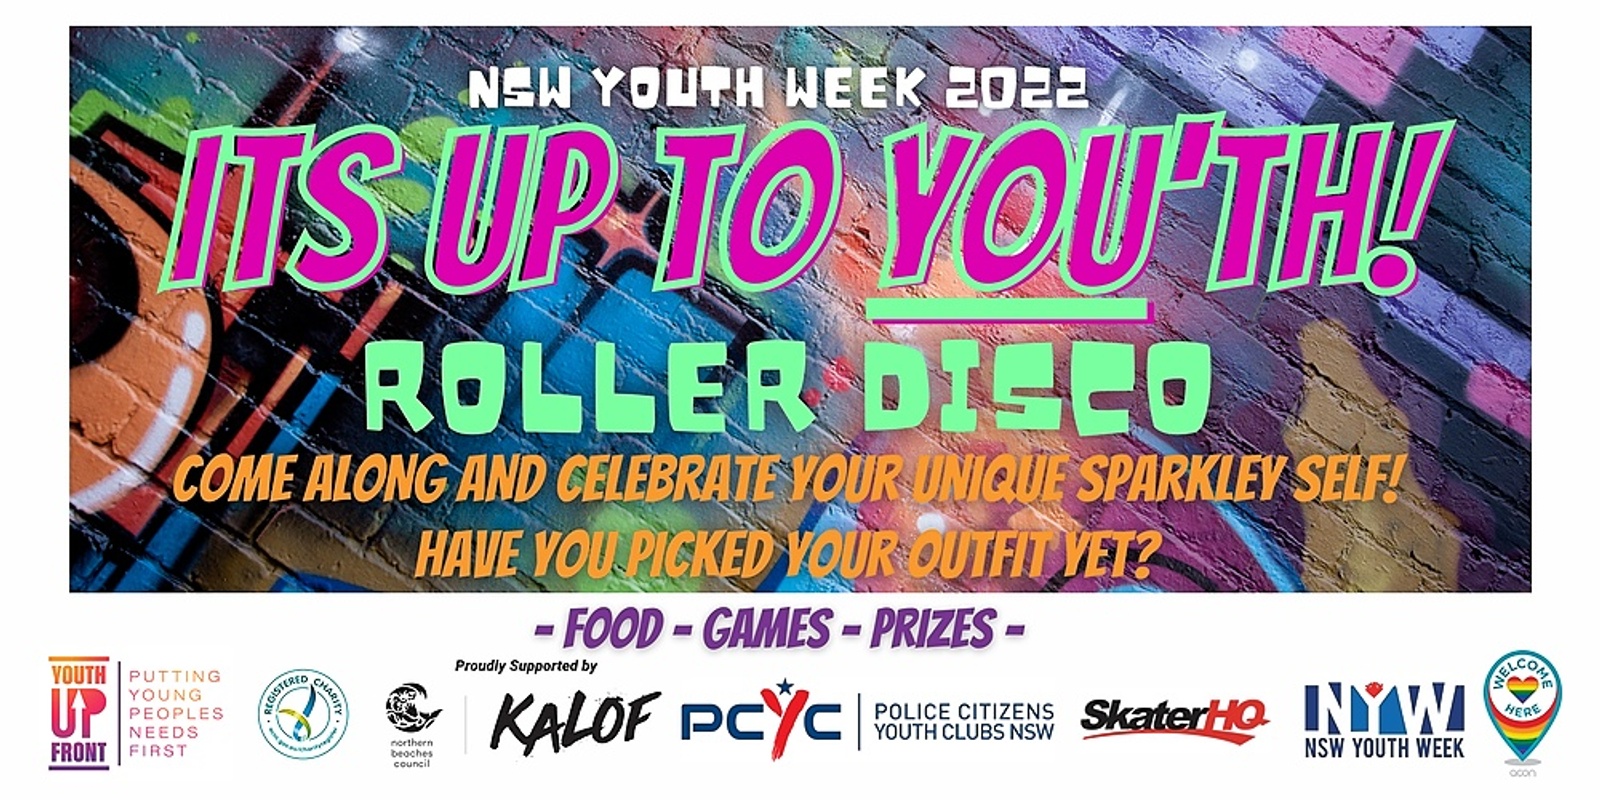 It's Up to YOU'th! Roller Disco - Youth Week!